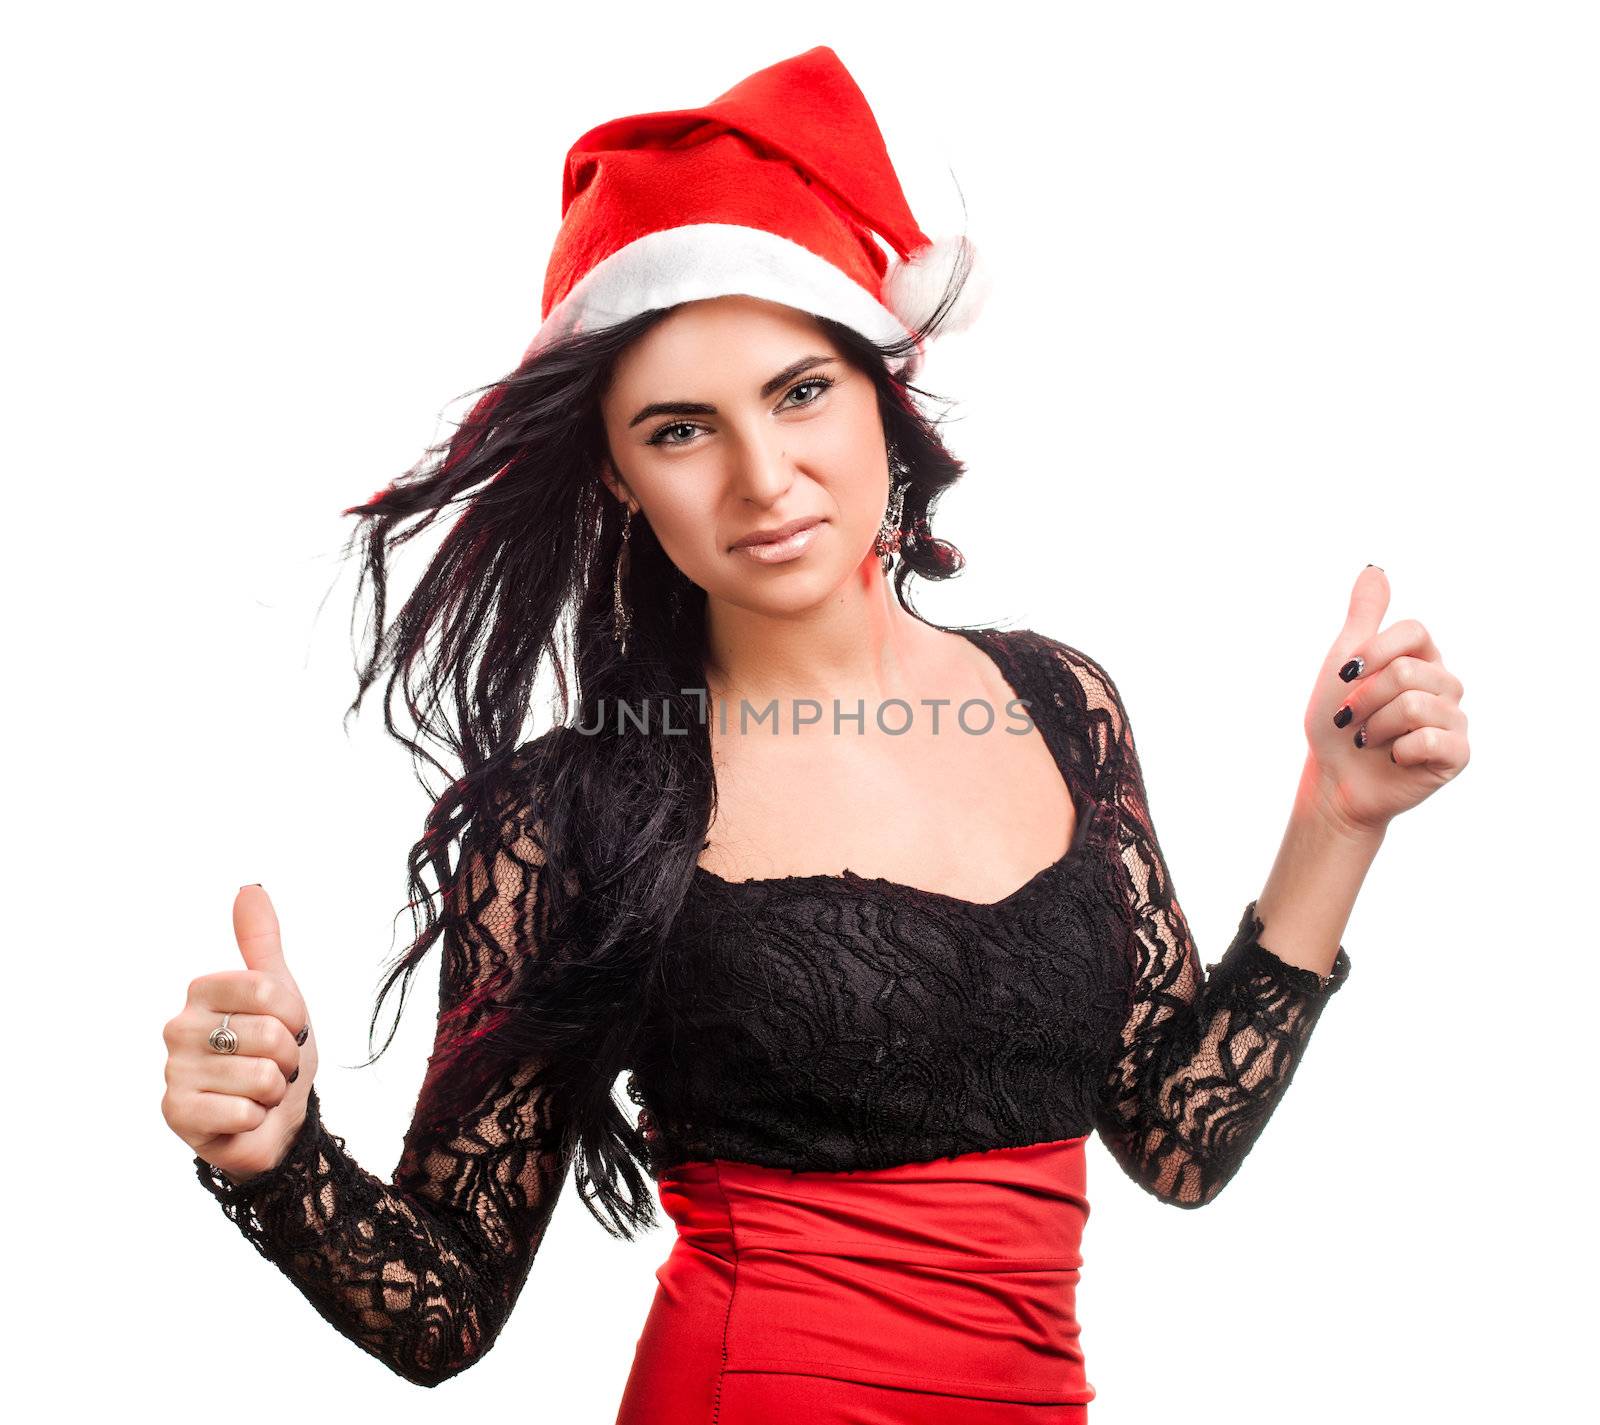  pretty woman in red santa claus hat by palinchak